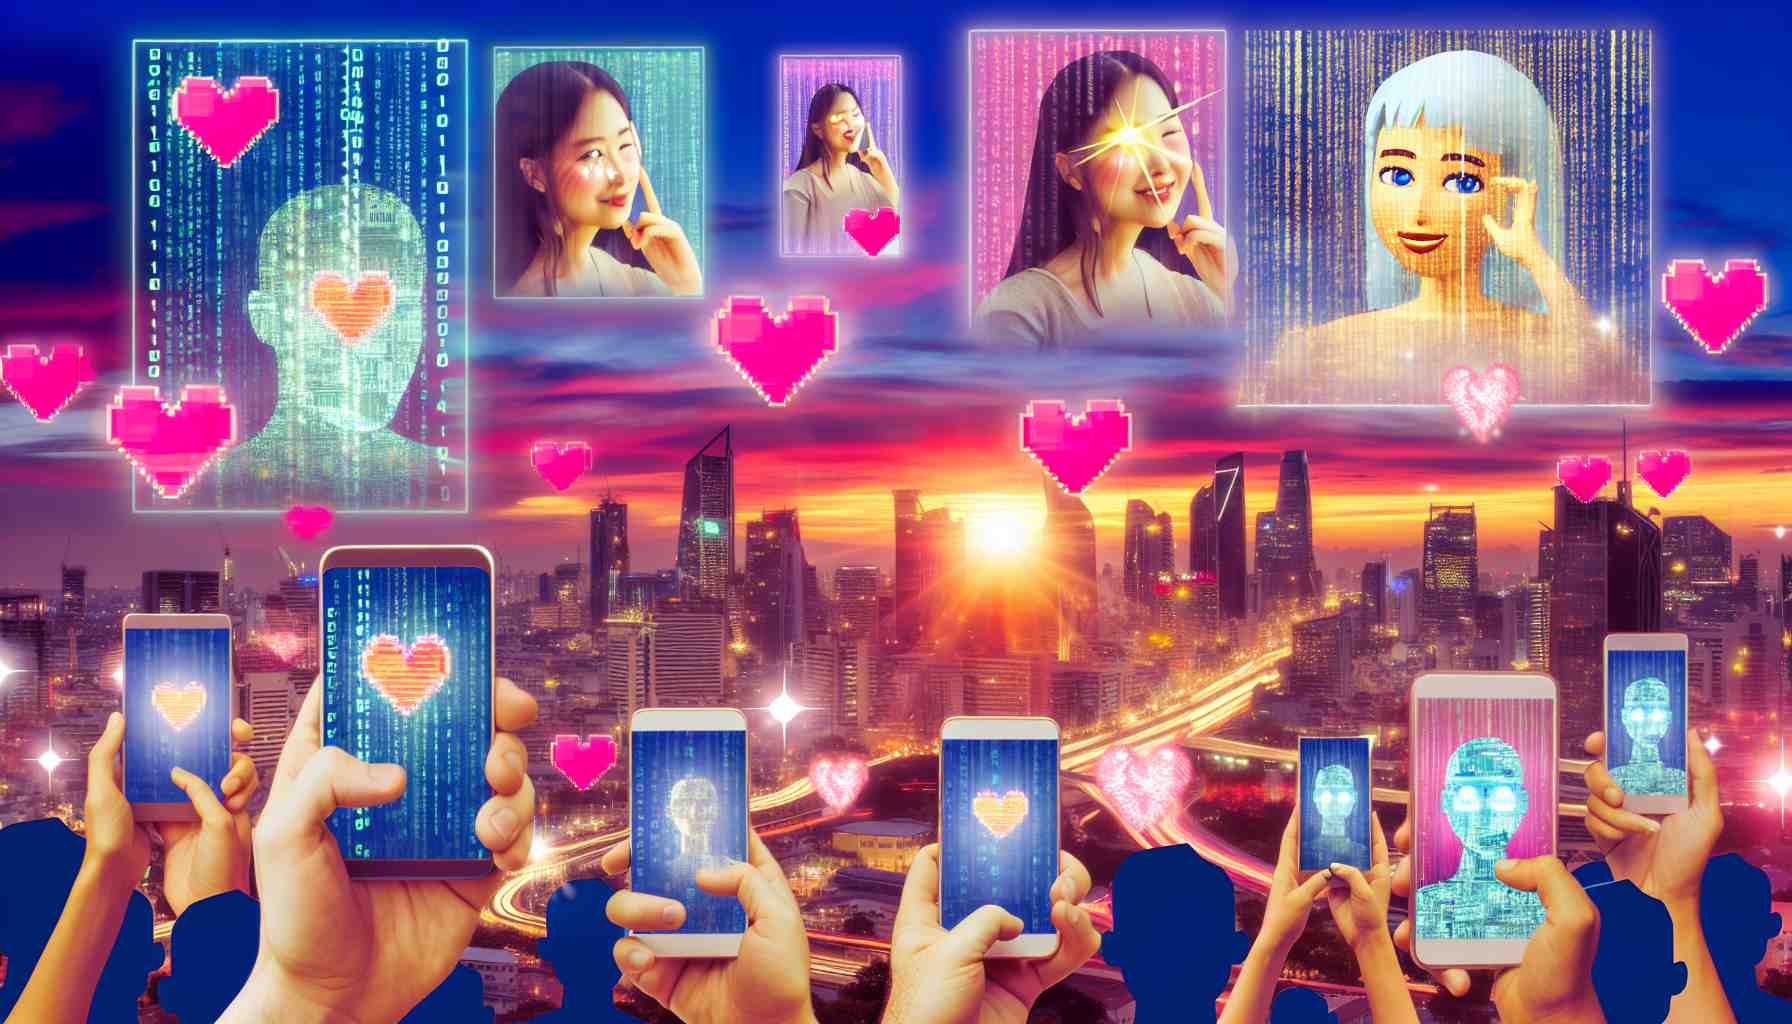 Uncover if 'ai girlfriend' tech is love's new disruptor or merely a digital scapegoat? Are they sparking divorces or just reflecting society's evolving needs? Discover the truth.